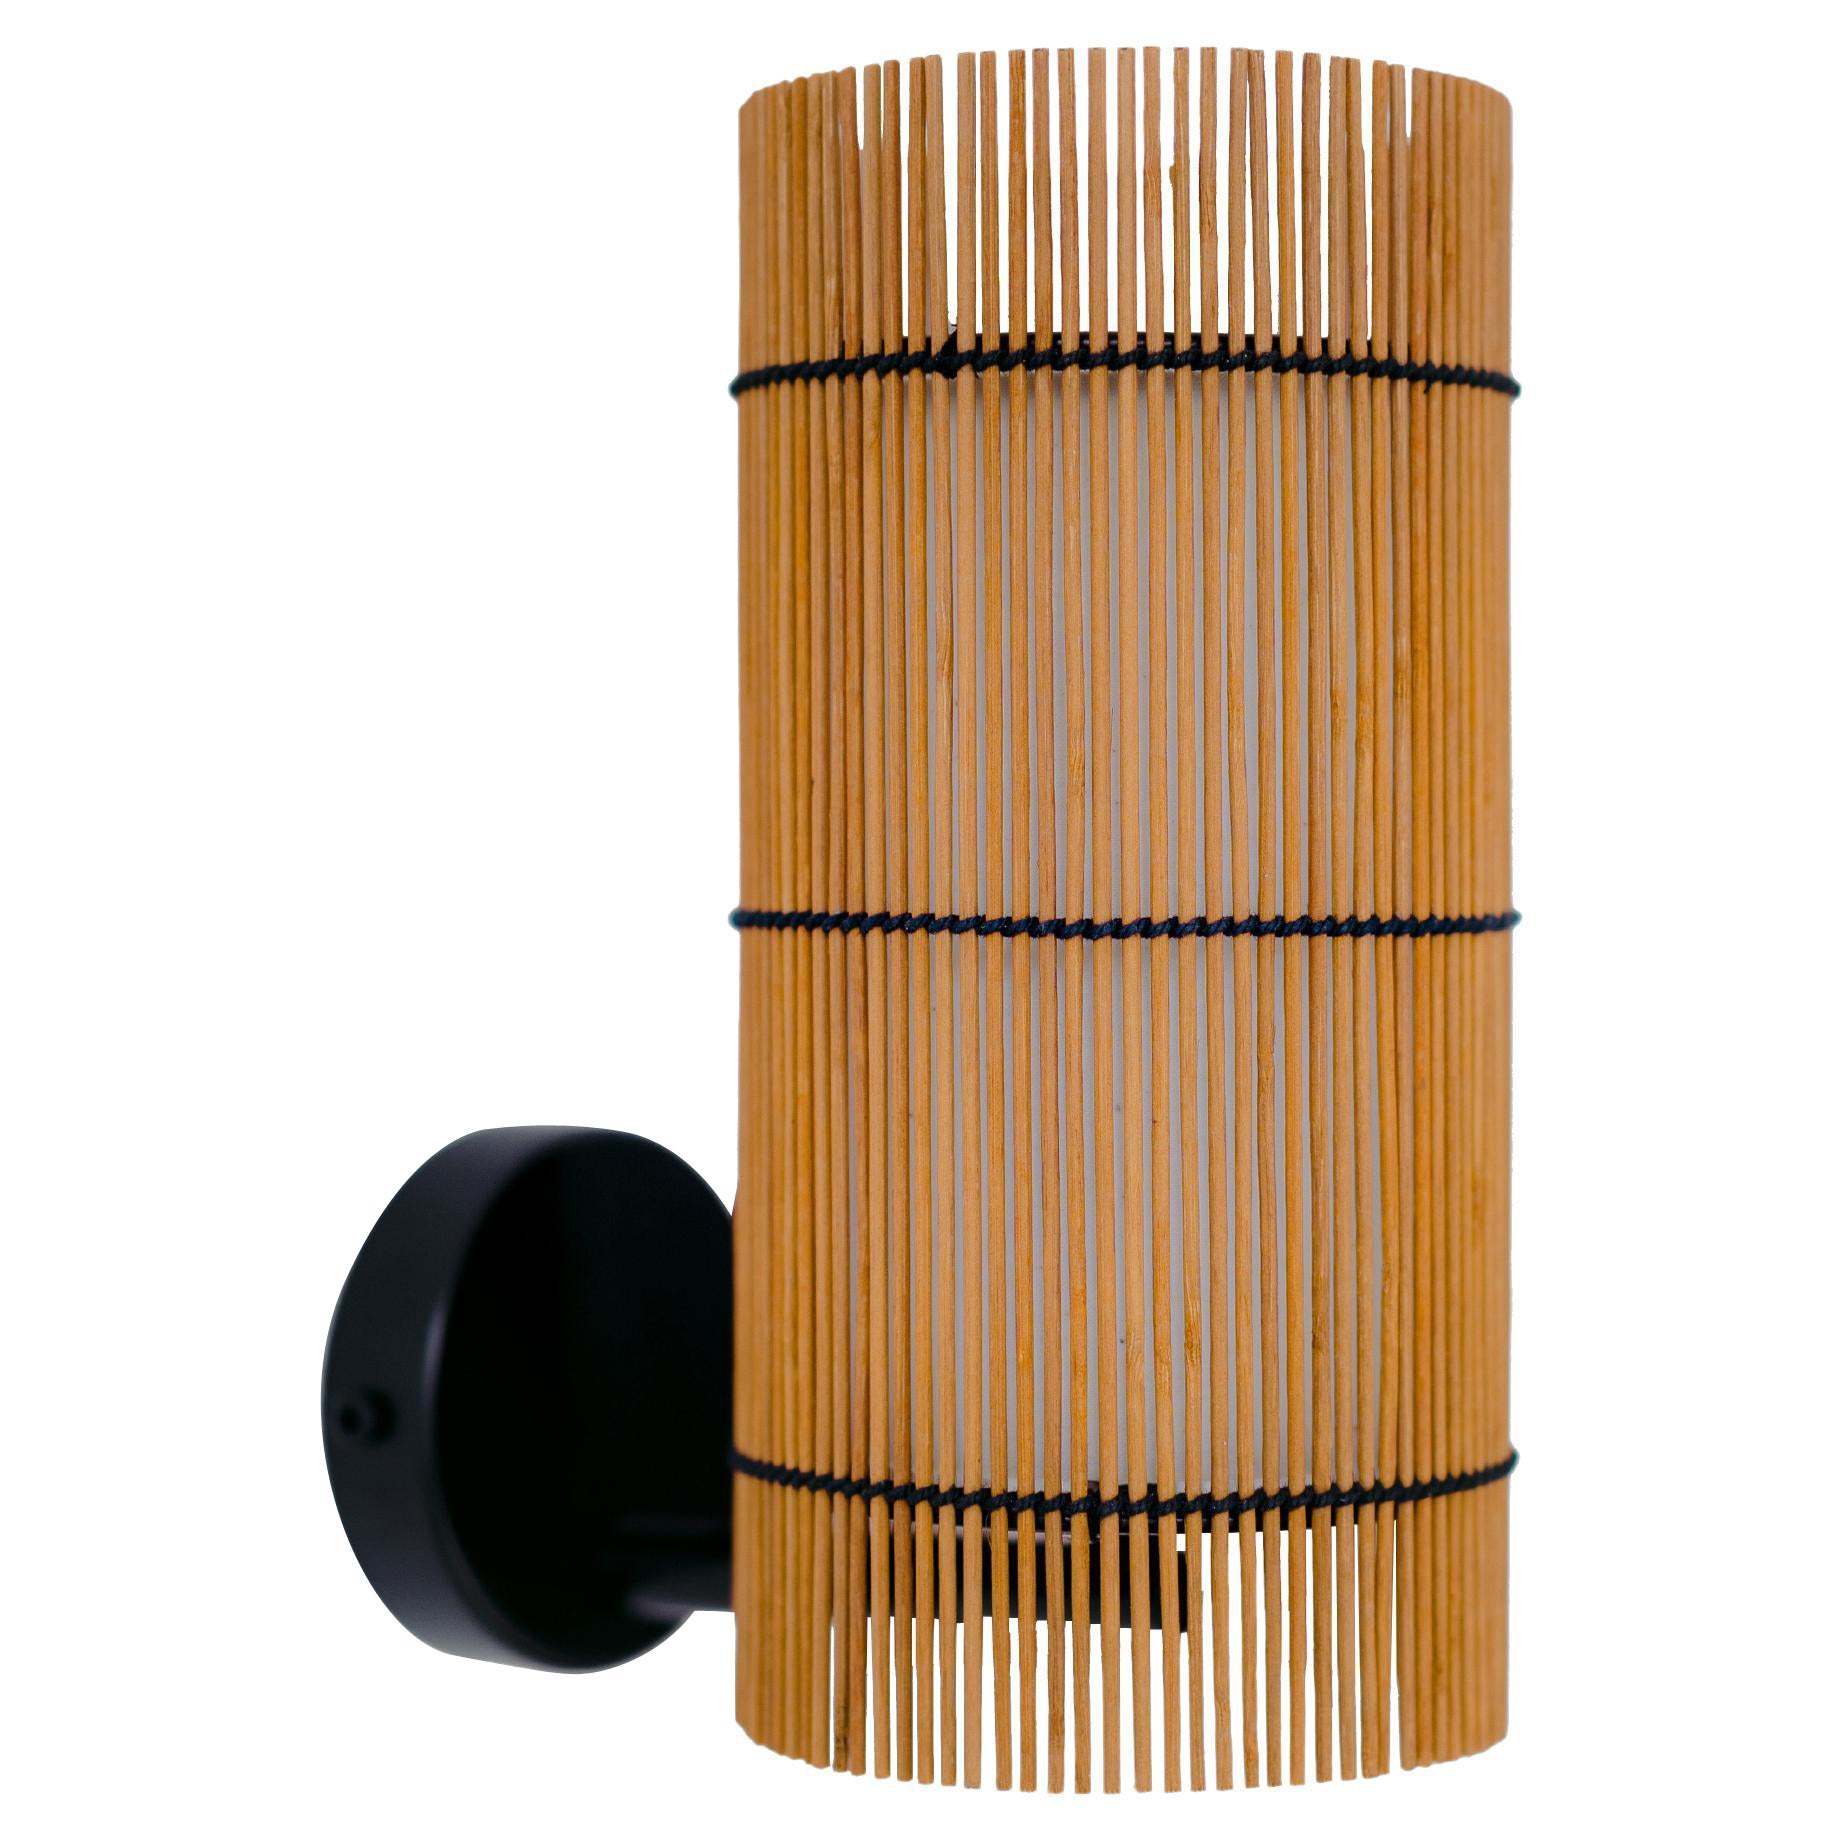 Contemporary, Handmade Wall Lamp Sconce, Bamboo Cherry, by Mediterranean Objects